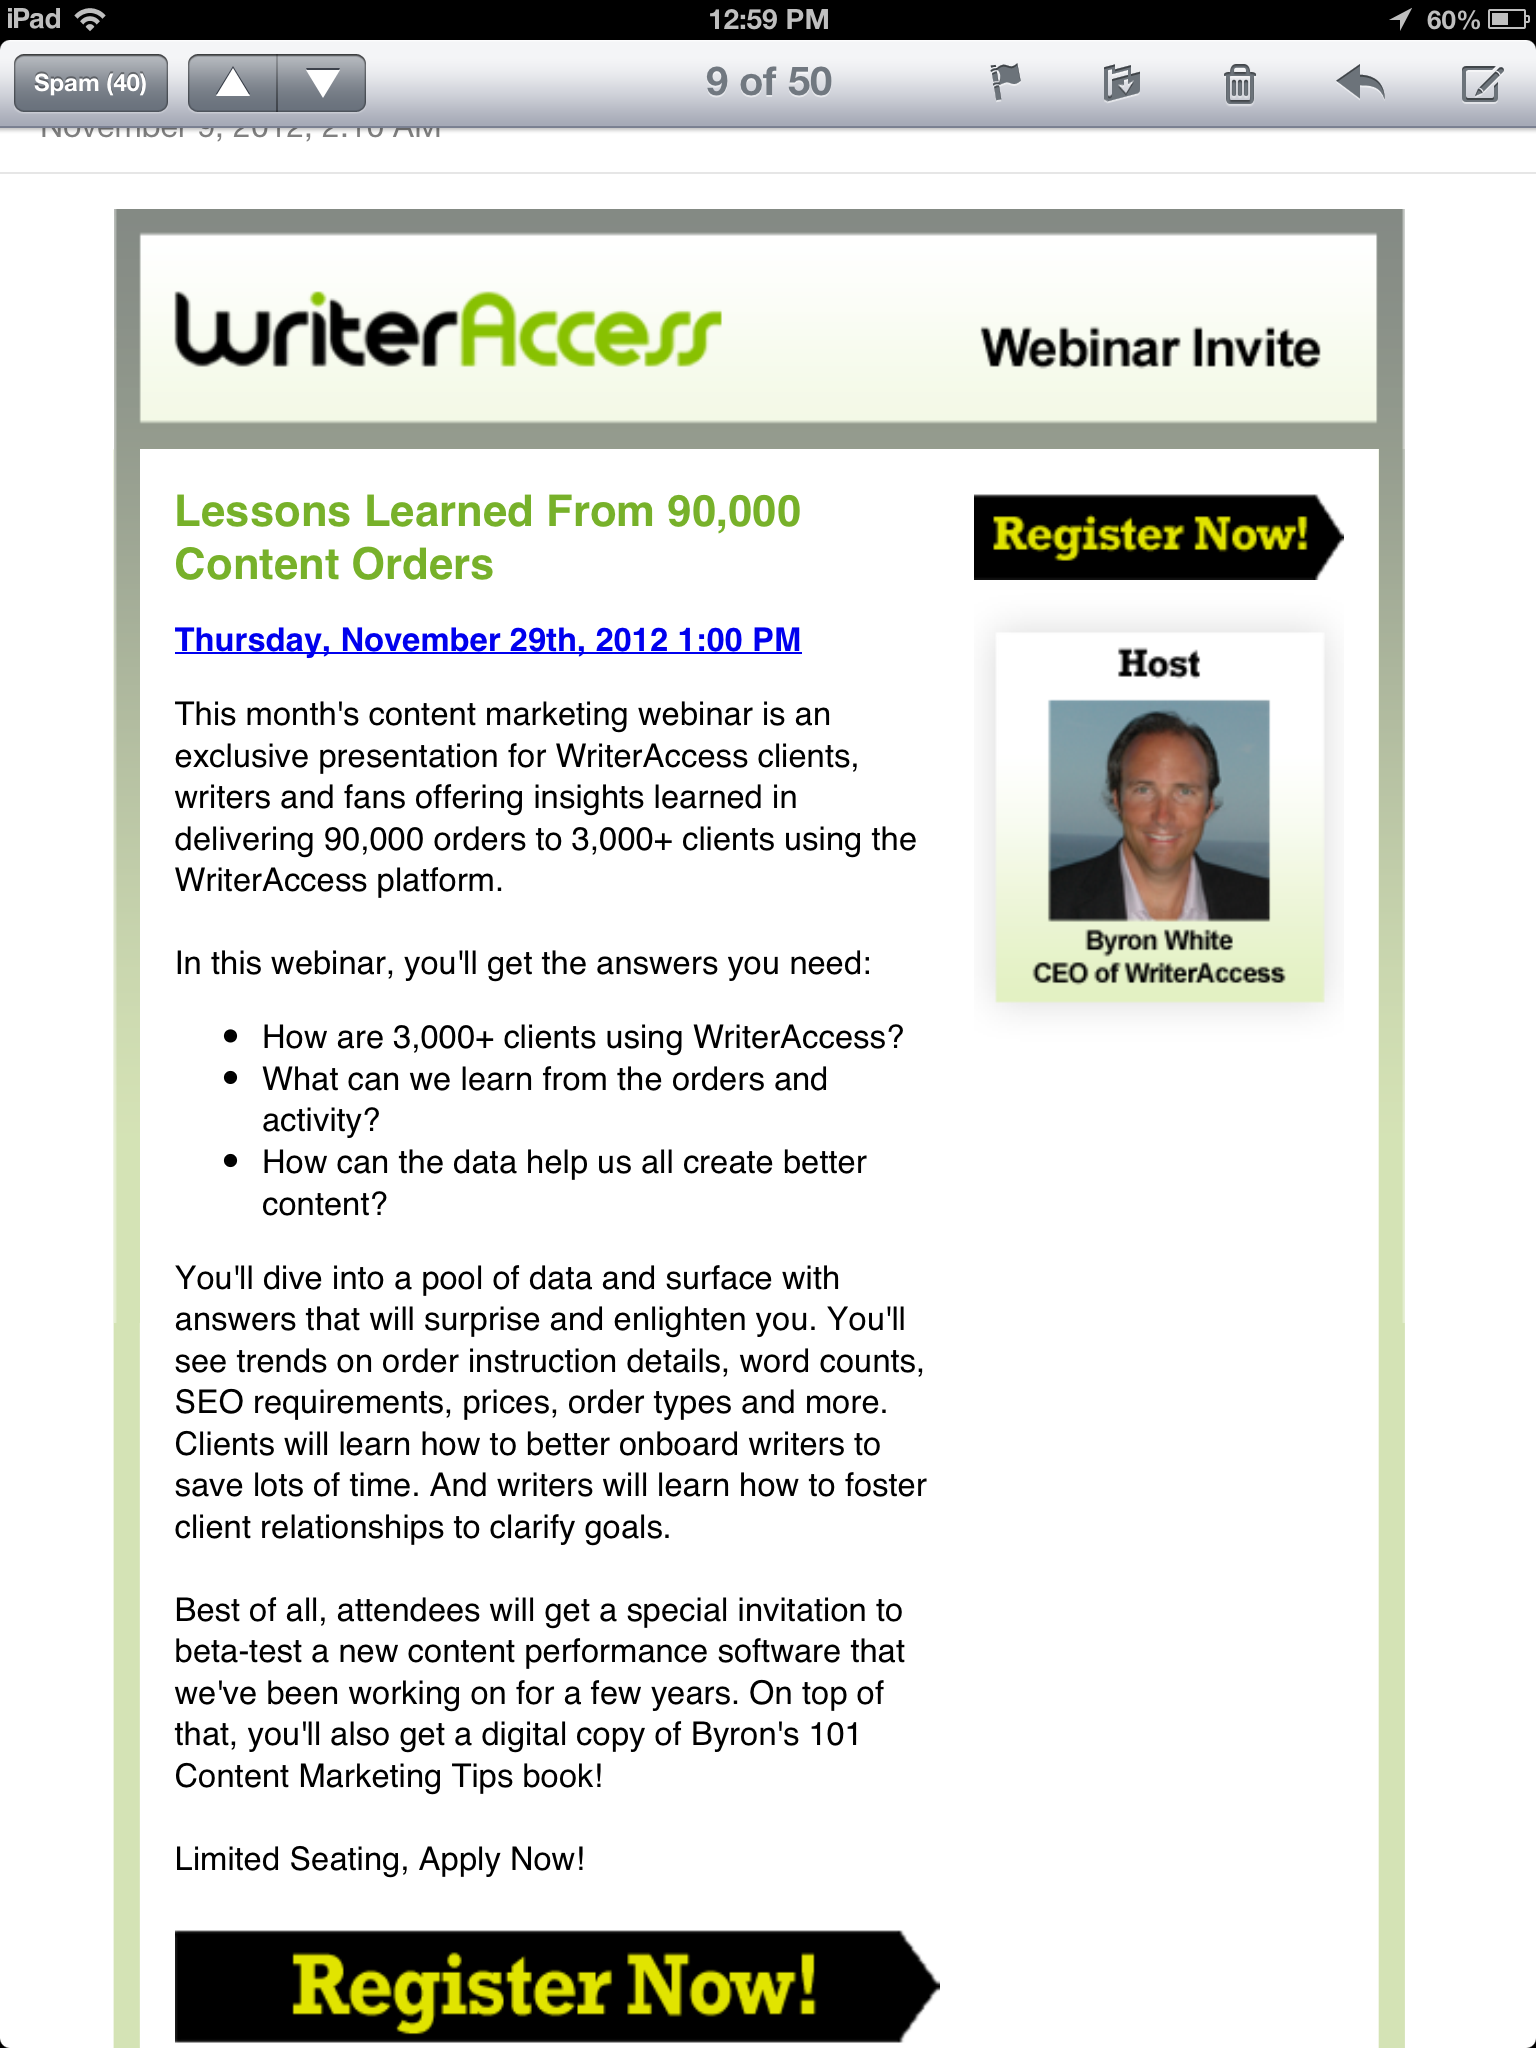 ... to optimize this email so that more people register for the webinar